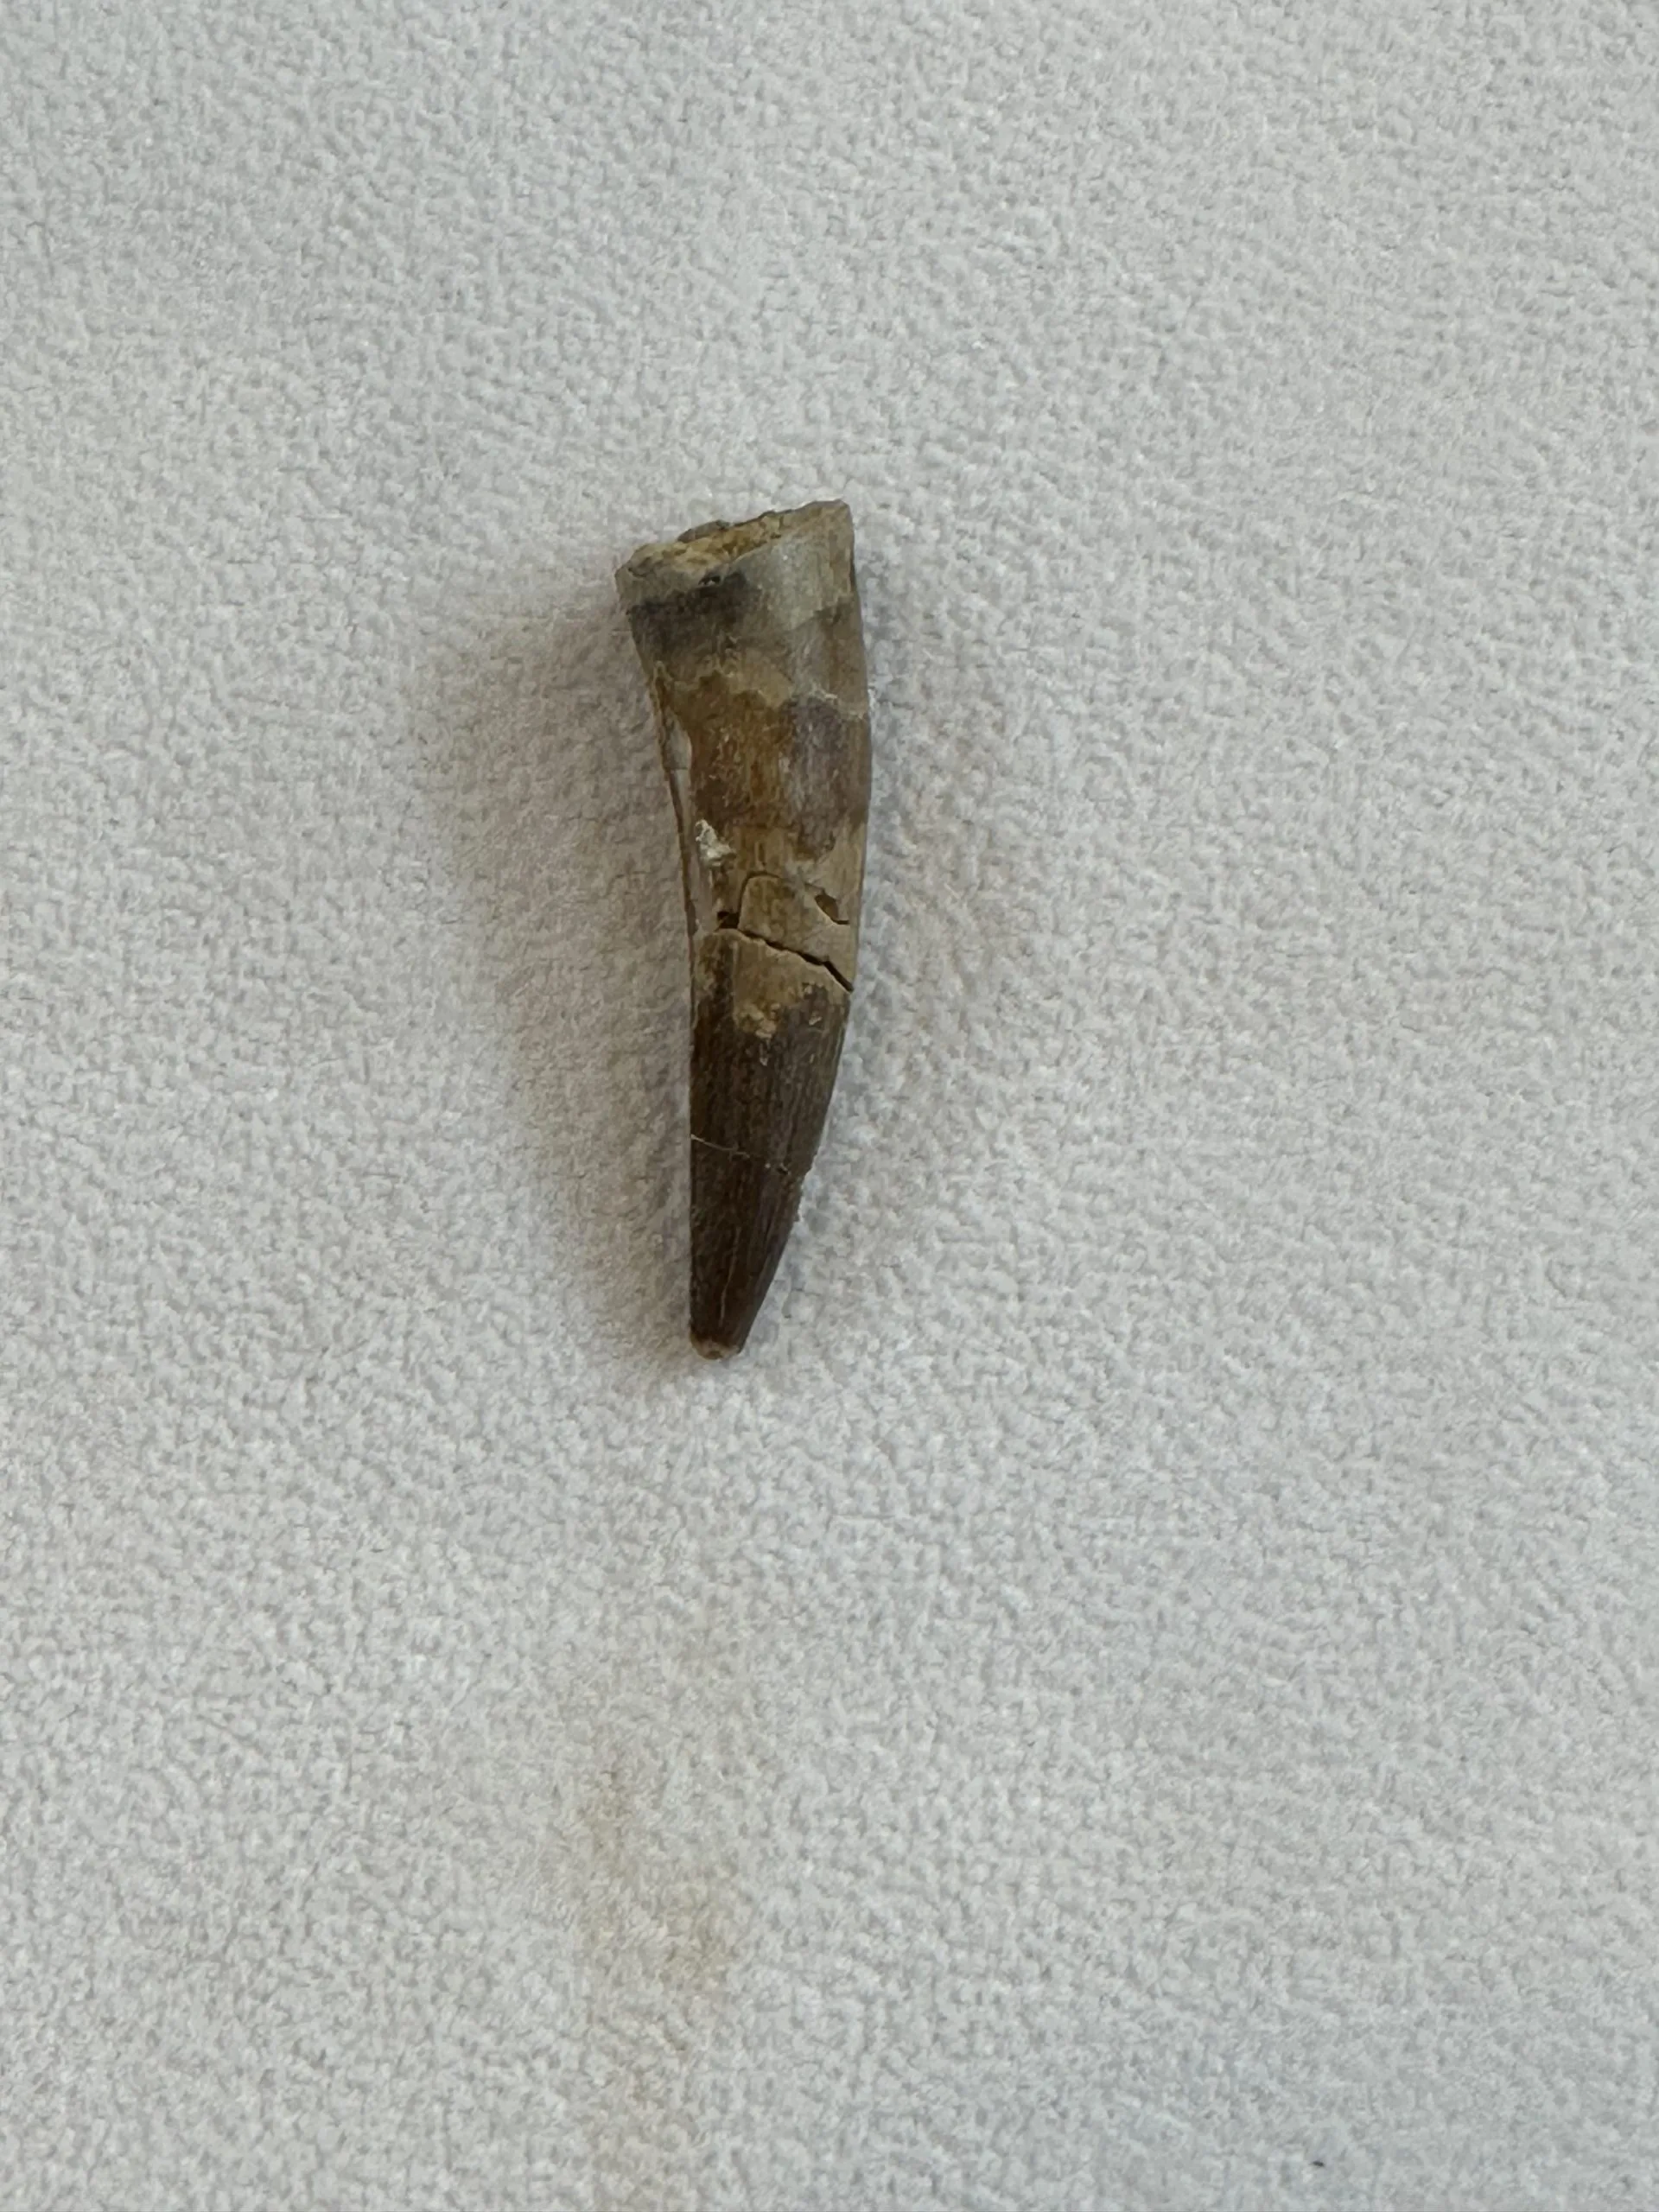 Spinosaurus Tooth Morocco, small but beautiful 1 5/8 inch Prehistoric Online